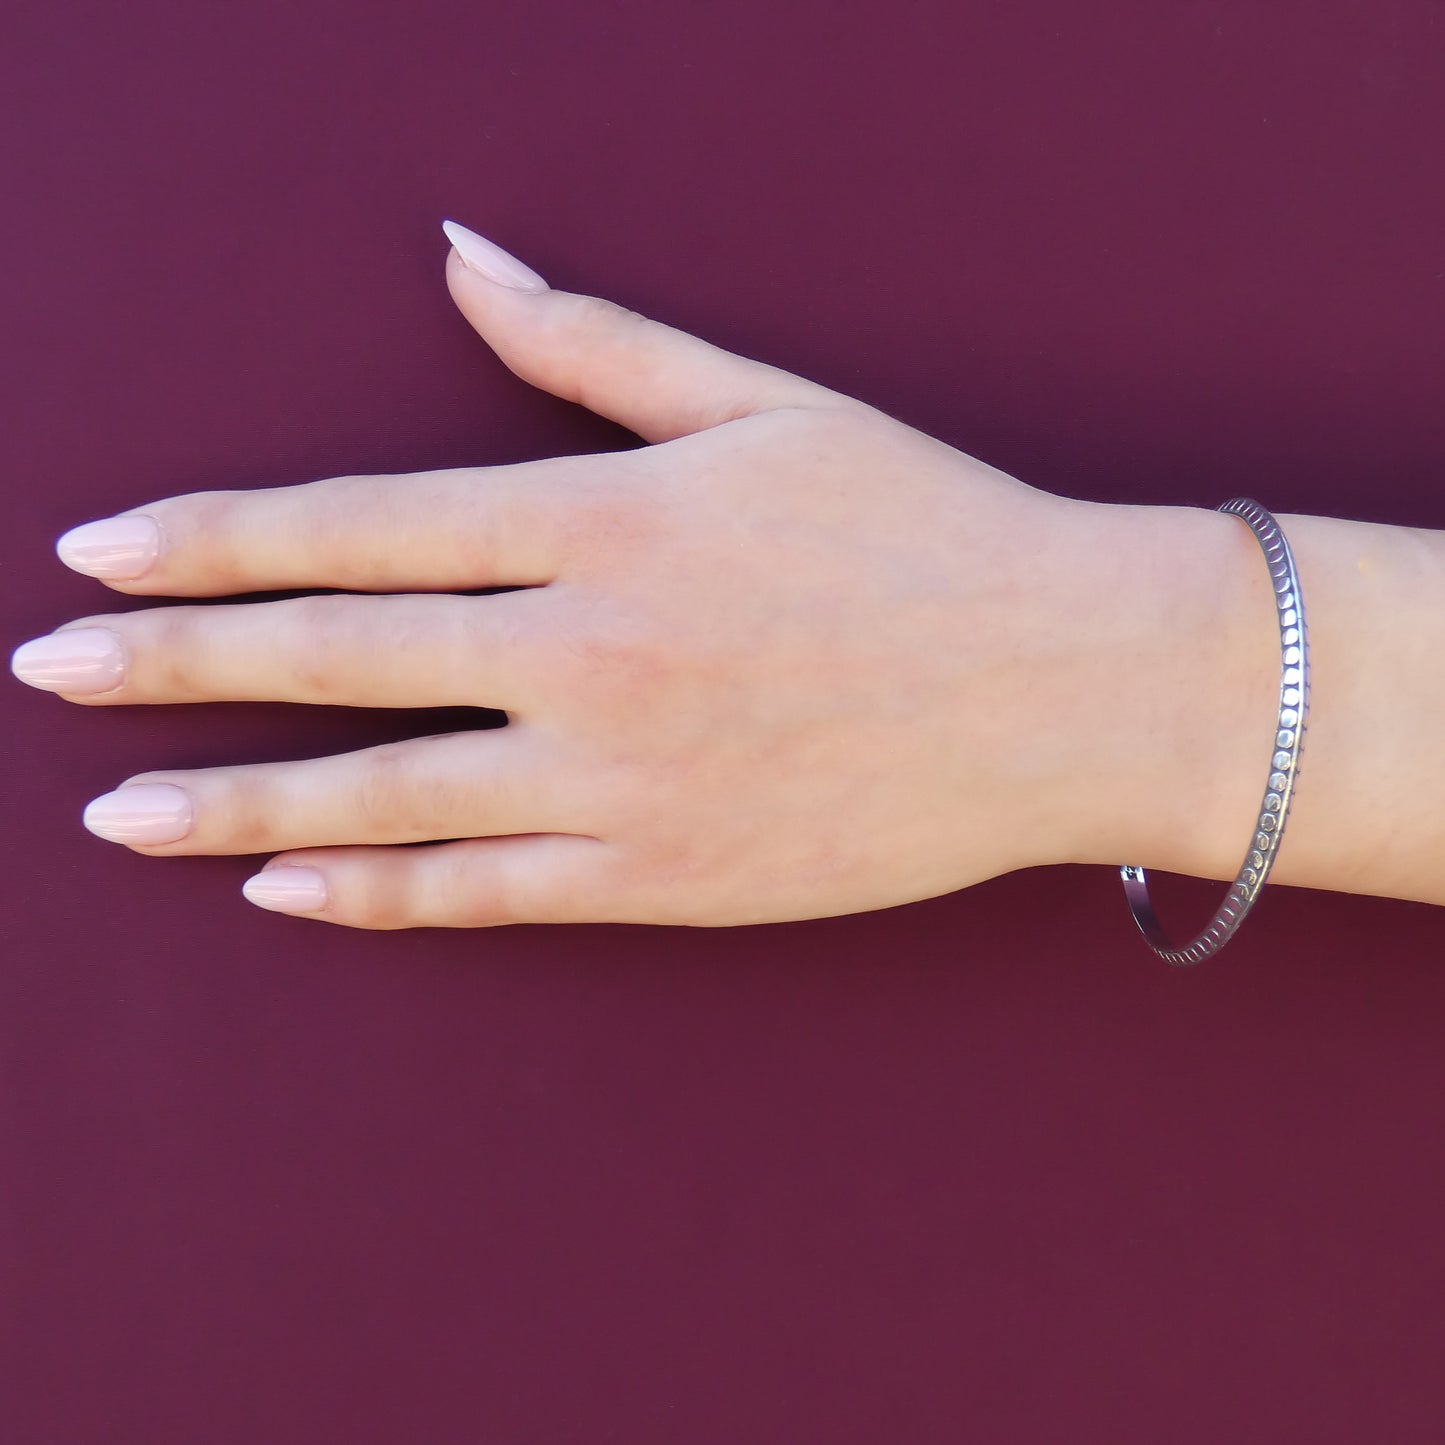 Woman wearing a silver bangle bracelet with flat dot design and a triangular profile.